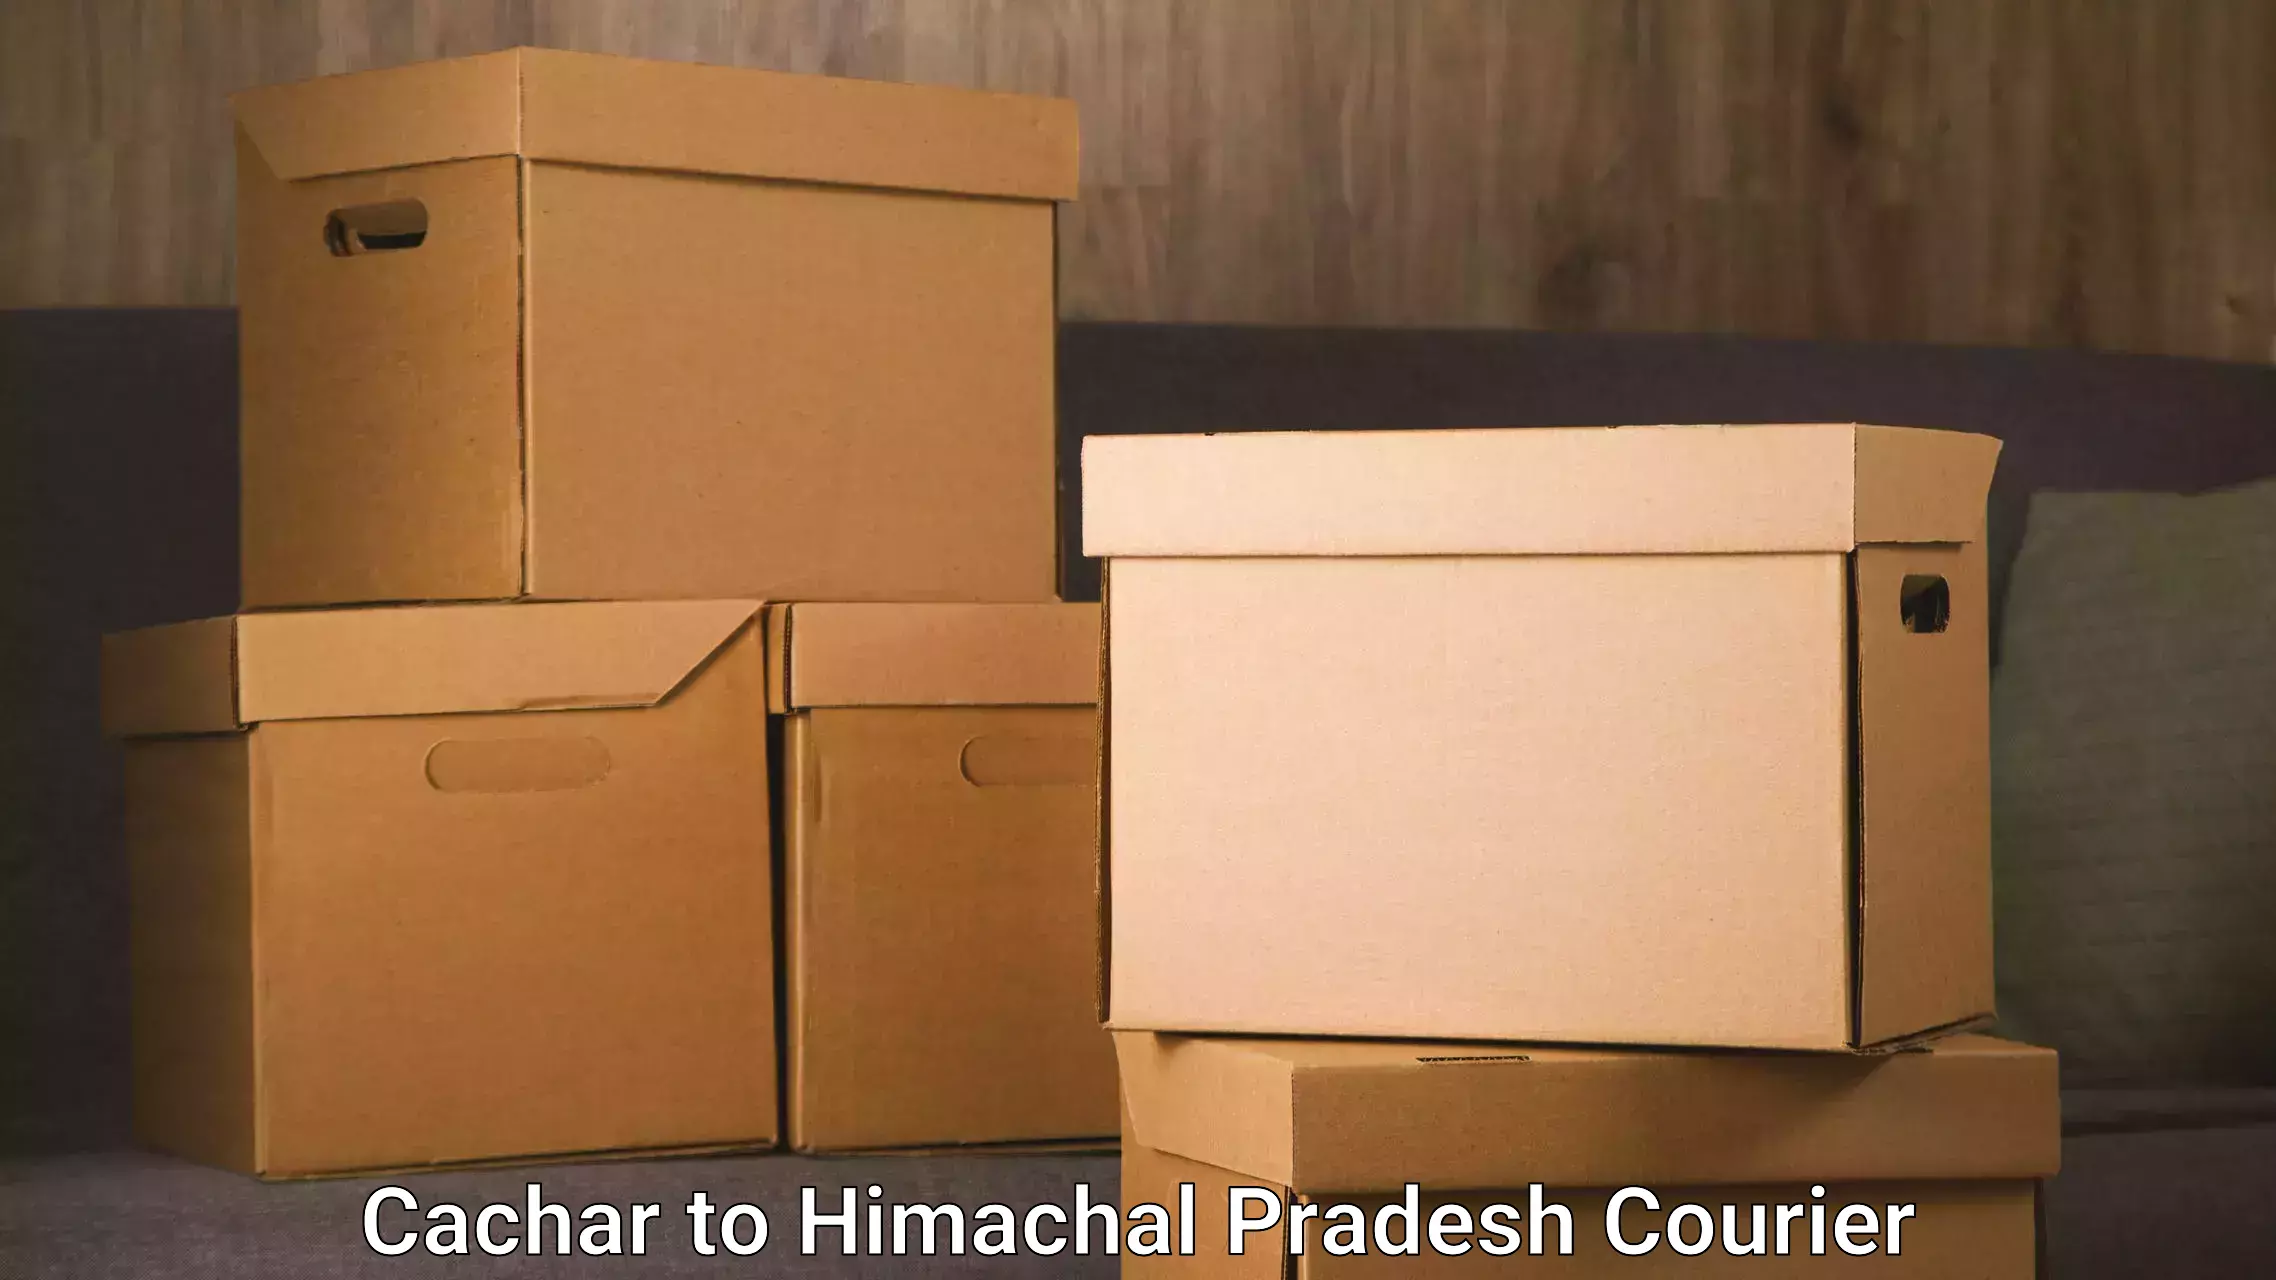 Reliable delivery network Cachar to Bilaspur Himachal Pradesh